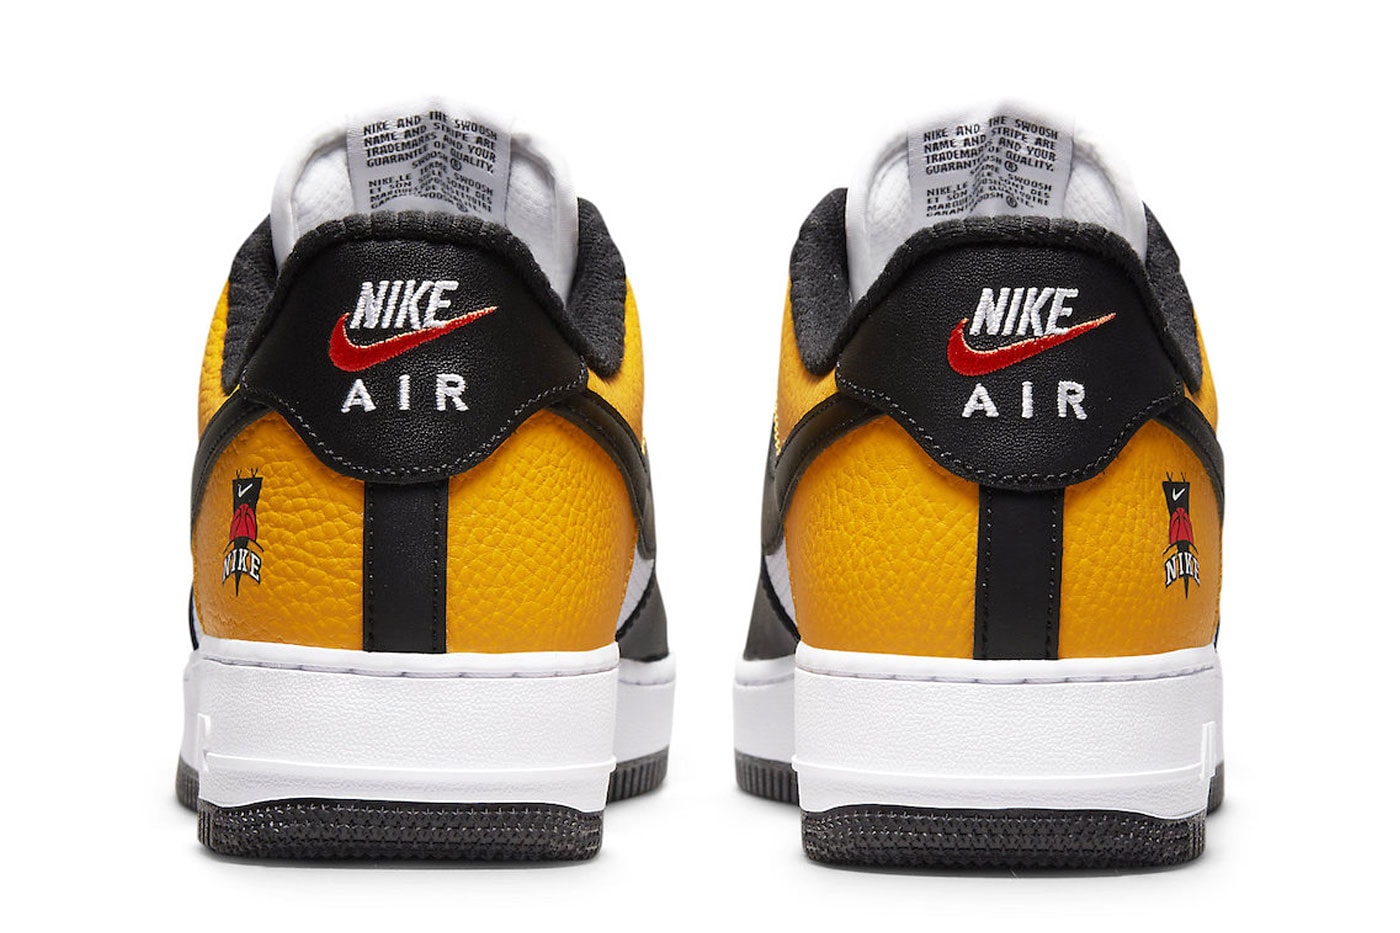 Latest Nike Air Force 1 Edition Goes Full Varsity With Jersey Mesh Paneling DQ7775-700 af1 low baskteball nba